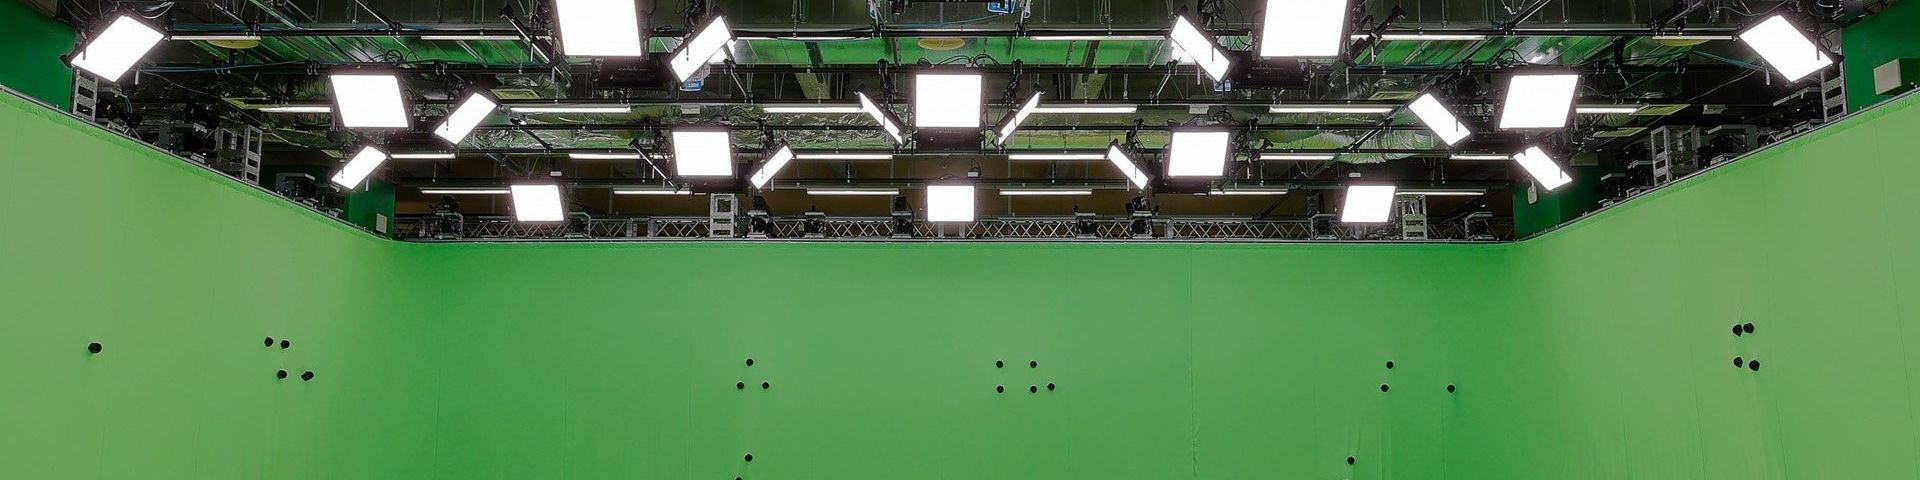 The ceiling and walls of the new Canon Volumetric Video studio in Kawasaki, Japan. The walls are green and have small, round black objects protruding from them at seemingly random positions and intervals. Above are more than two dozen flat square lights hanging from a rig below the ceiling.